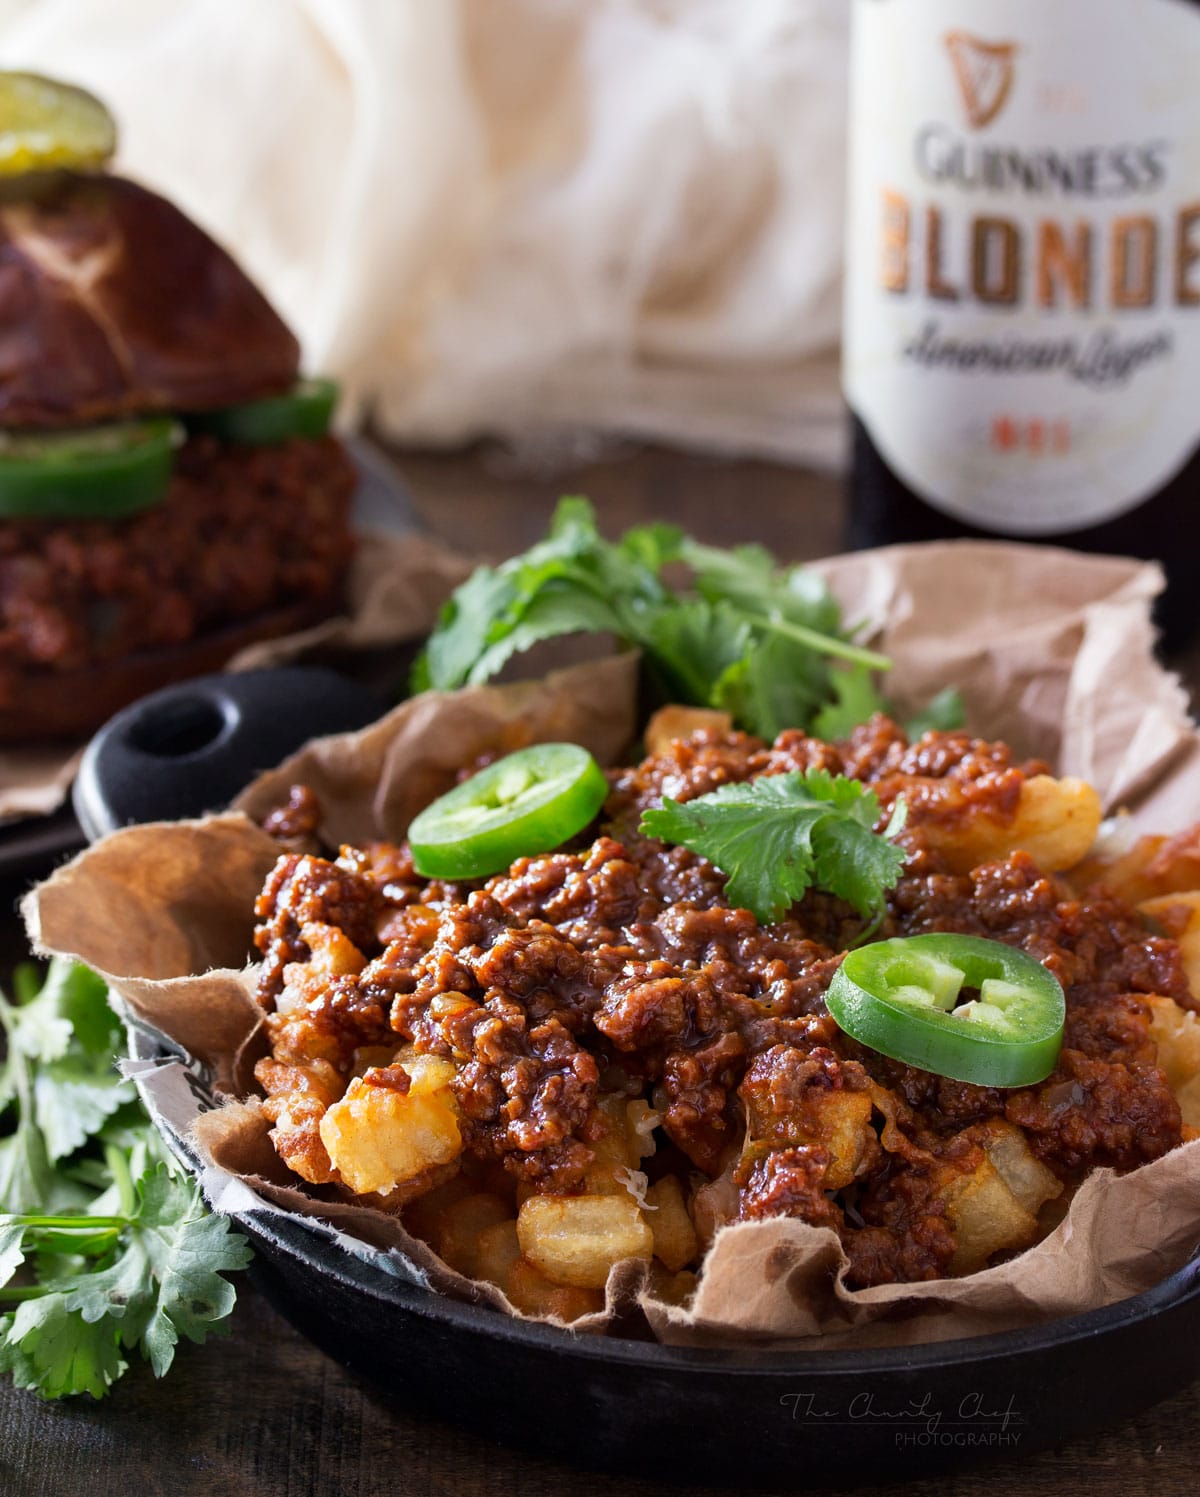 Beef Beer and Chorizo Sloppy Joes | These aren't the usual sloppy joes... made with beef, spicy chorizo, jalapeno and beer, they're an adult version of everyone's favorite childhood sandwich! | http://thechunkychef.com